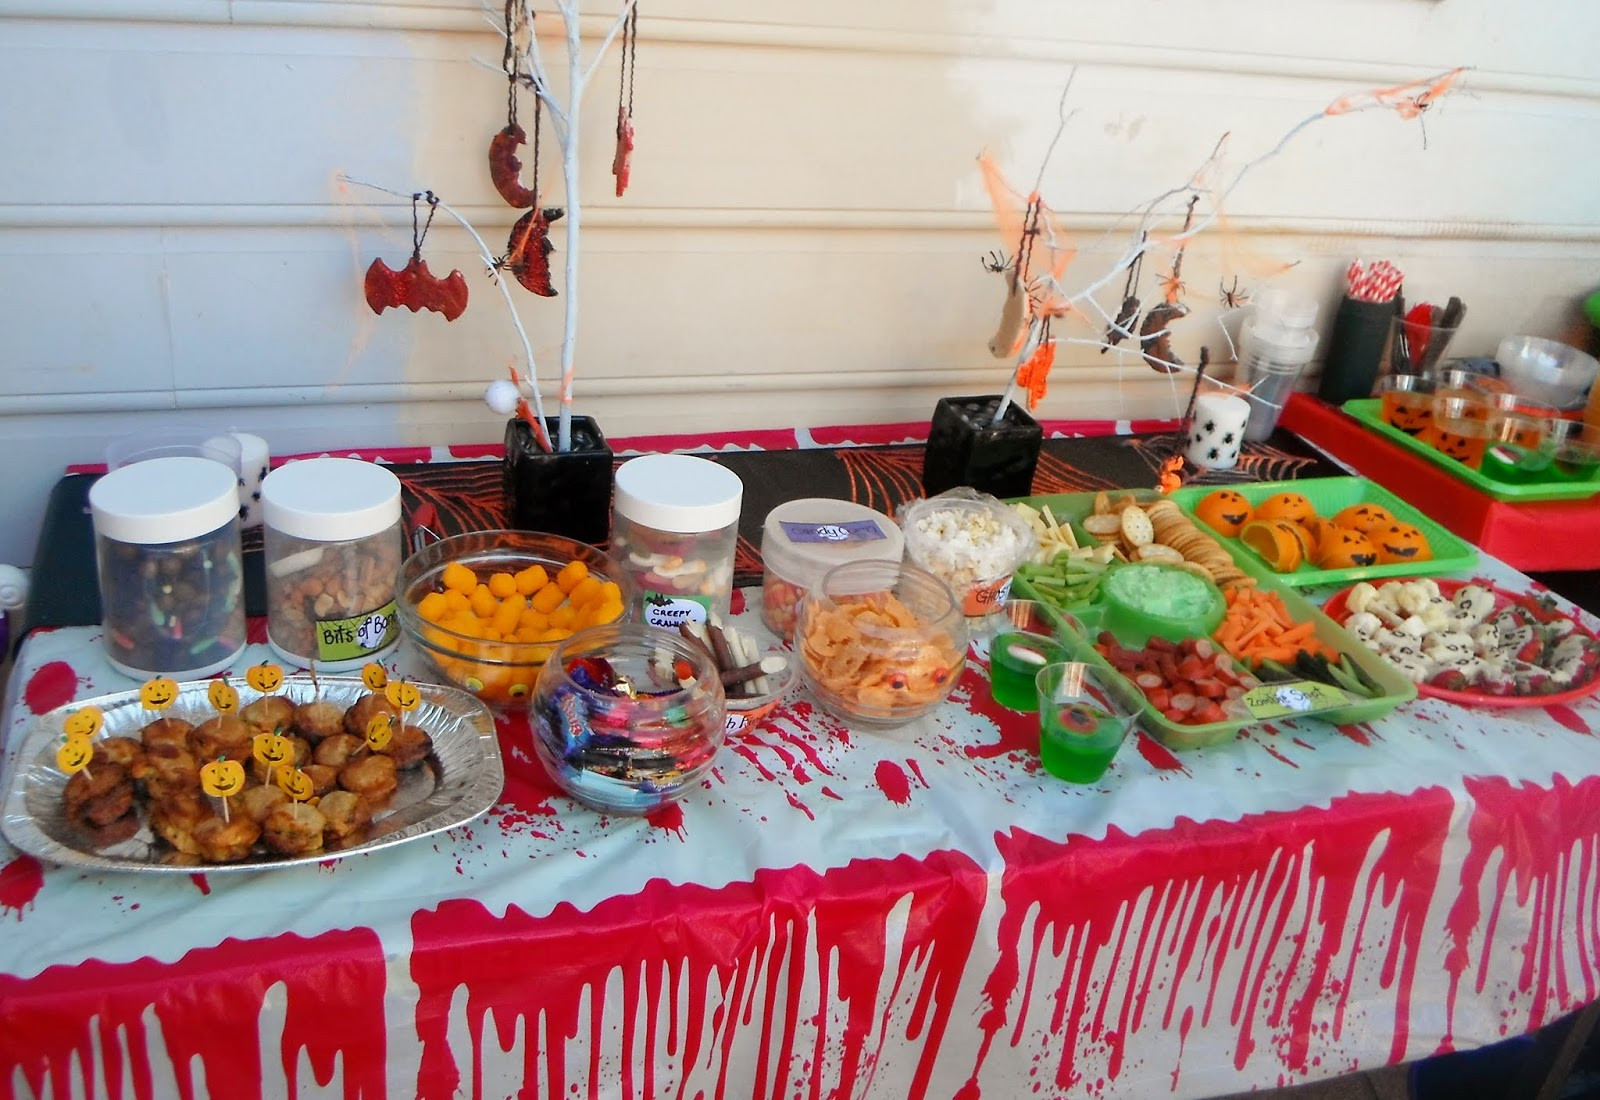 Ideas For Halloween Party
 Adventures at home with Mum Halloween Party Food